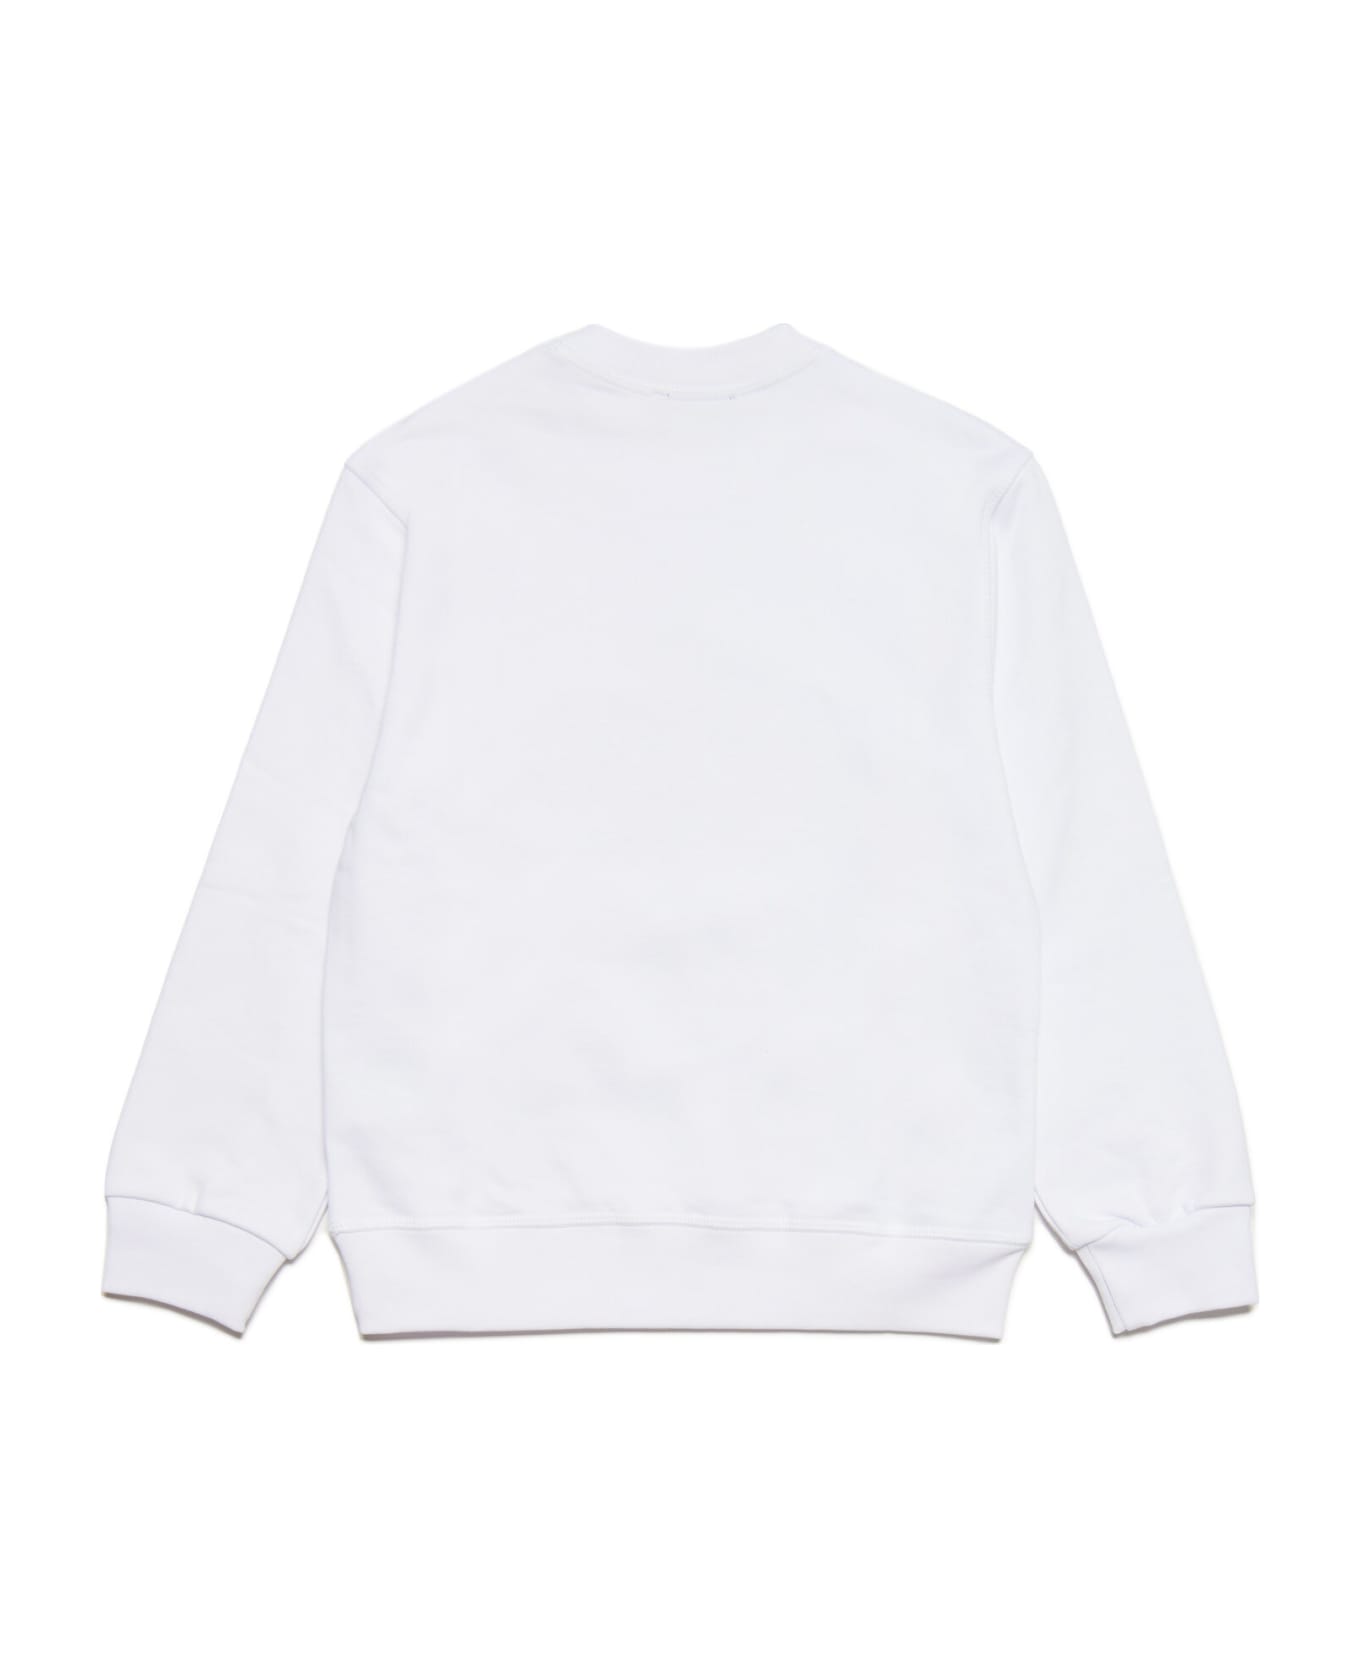 Dsquared2 D2s695u Relax Sweat-shirt Dsquared White Cotton Sweatshirt With Maple Leaf - White